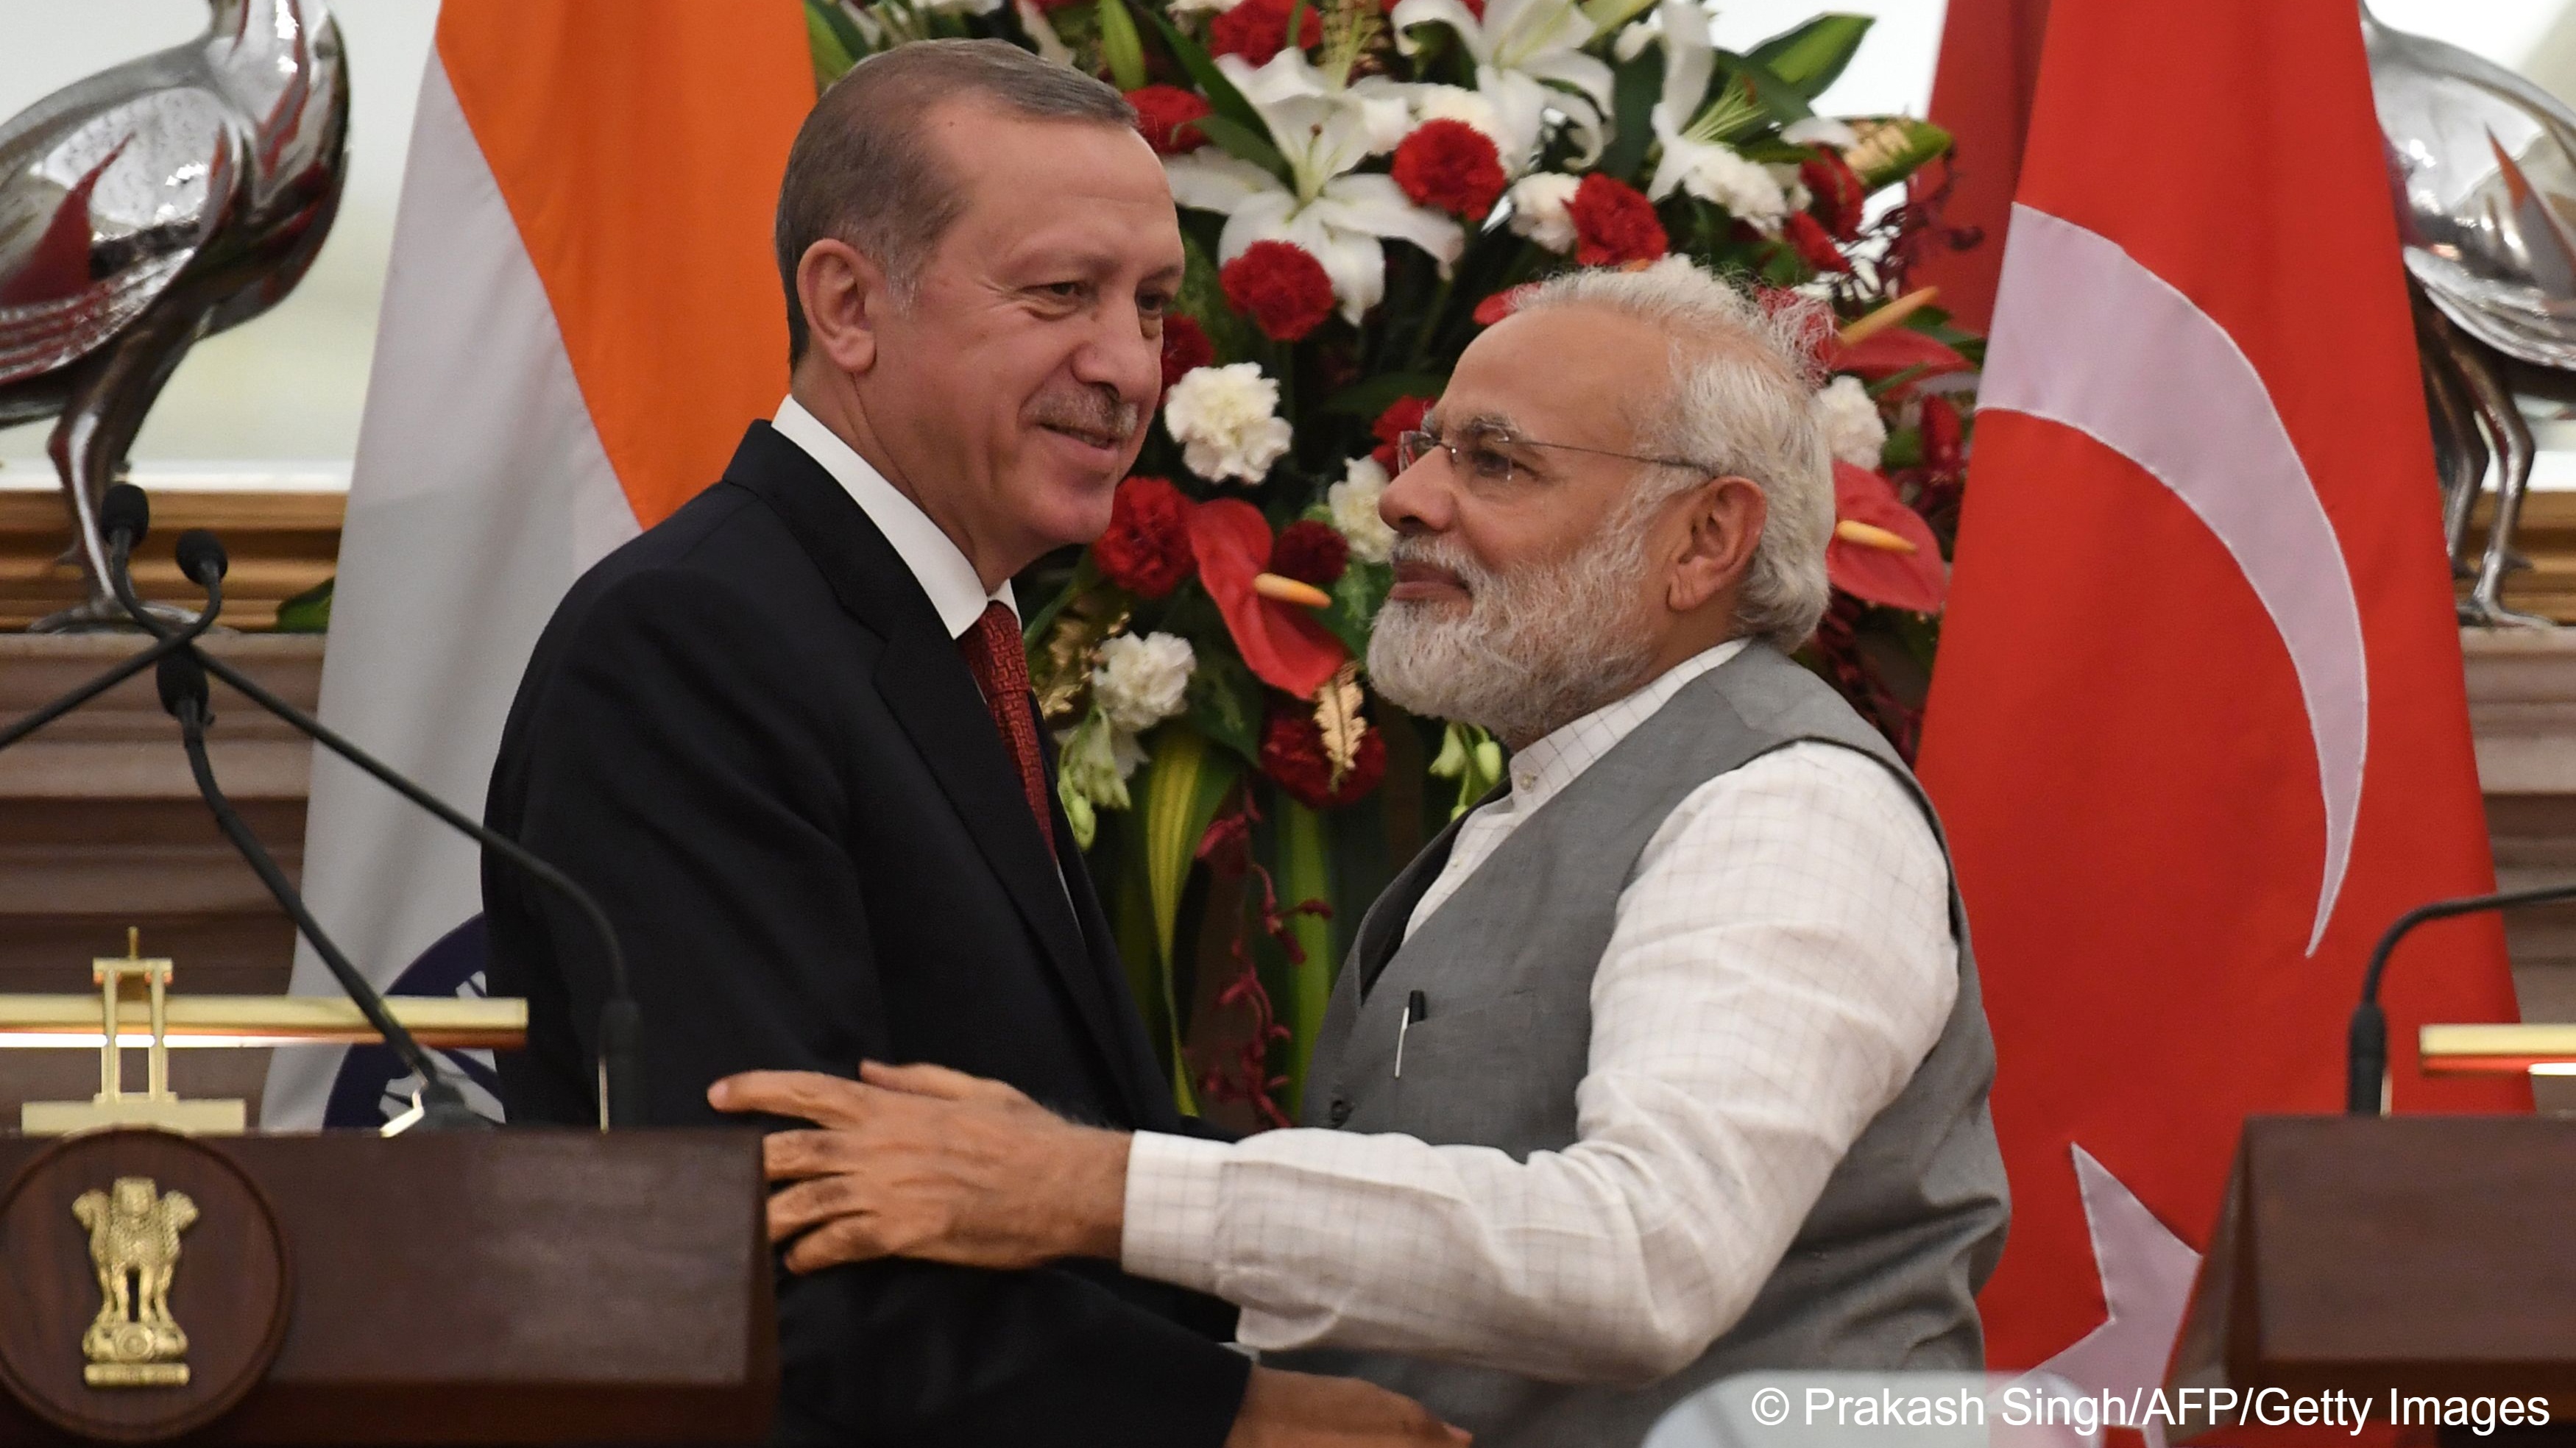 Turkish President Recep Tayyip Erdogen and India's Prime Minister Narendra Modi embrace during Erodgan's state visit to India, 1 May 2017 (photo: AFP/Getty Images)